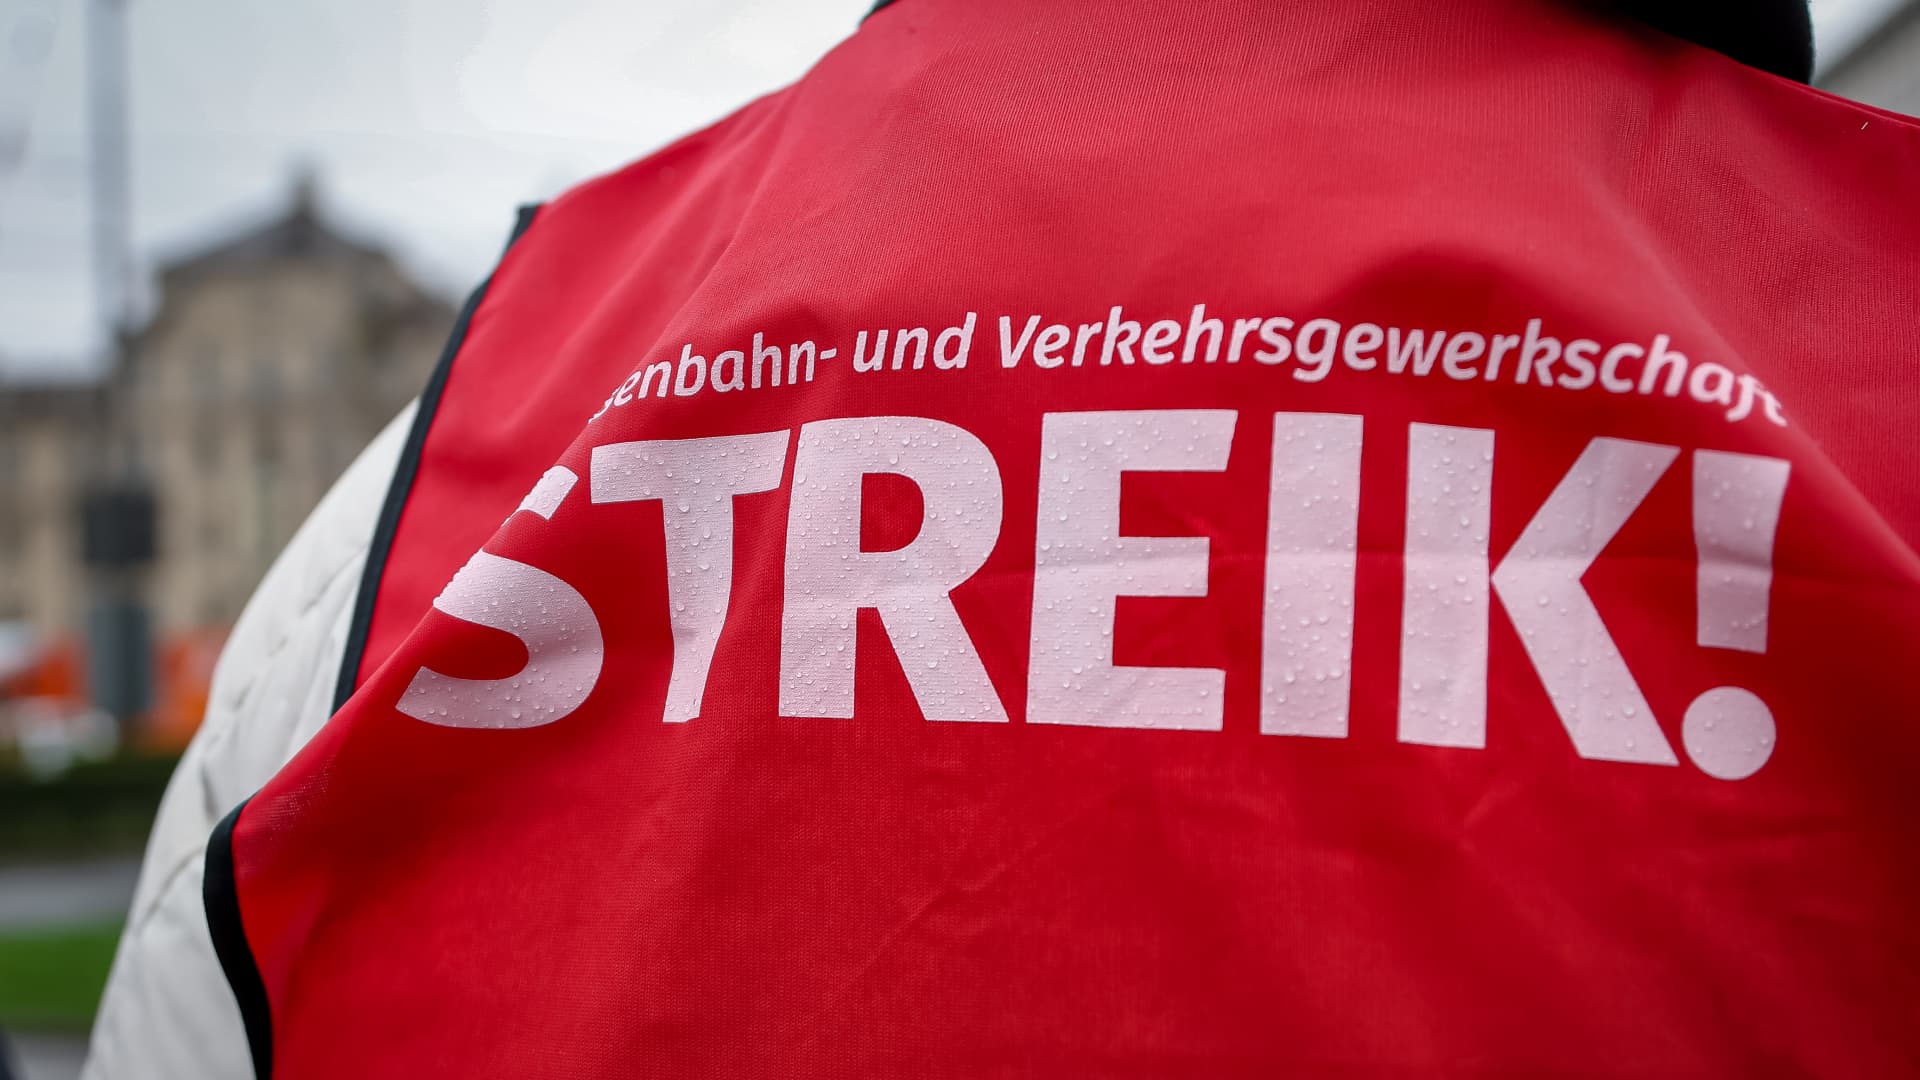 Biggest strike in decades brings Germany to a standstill